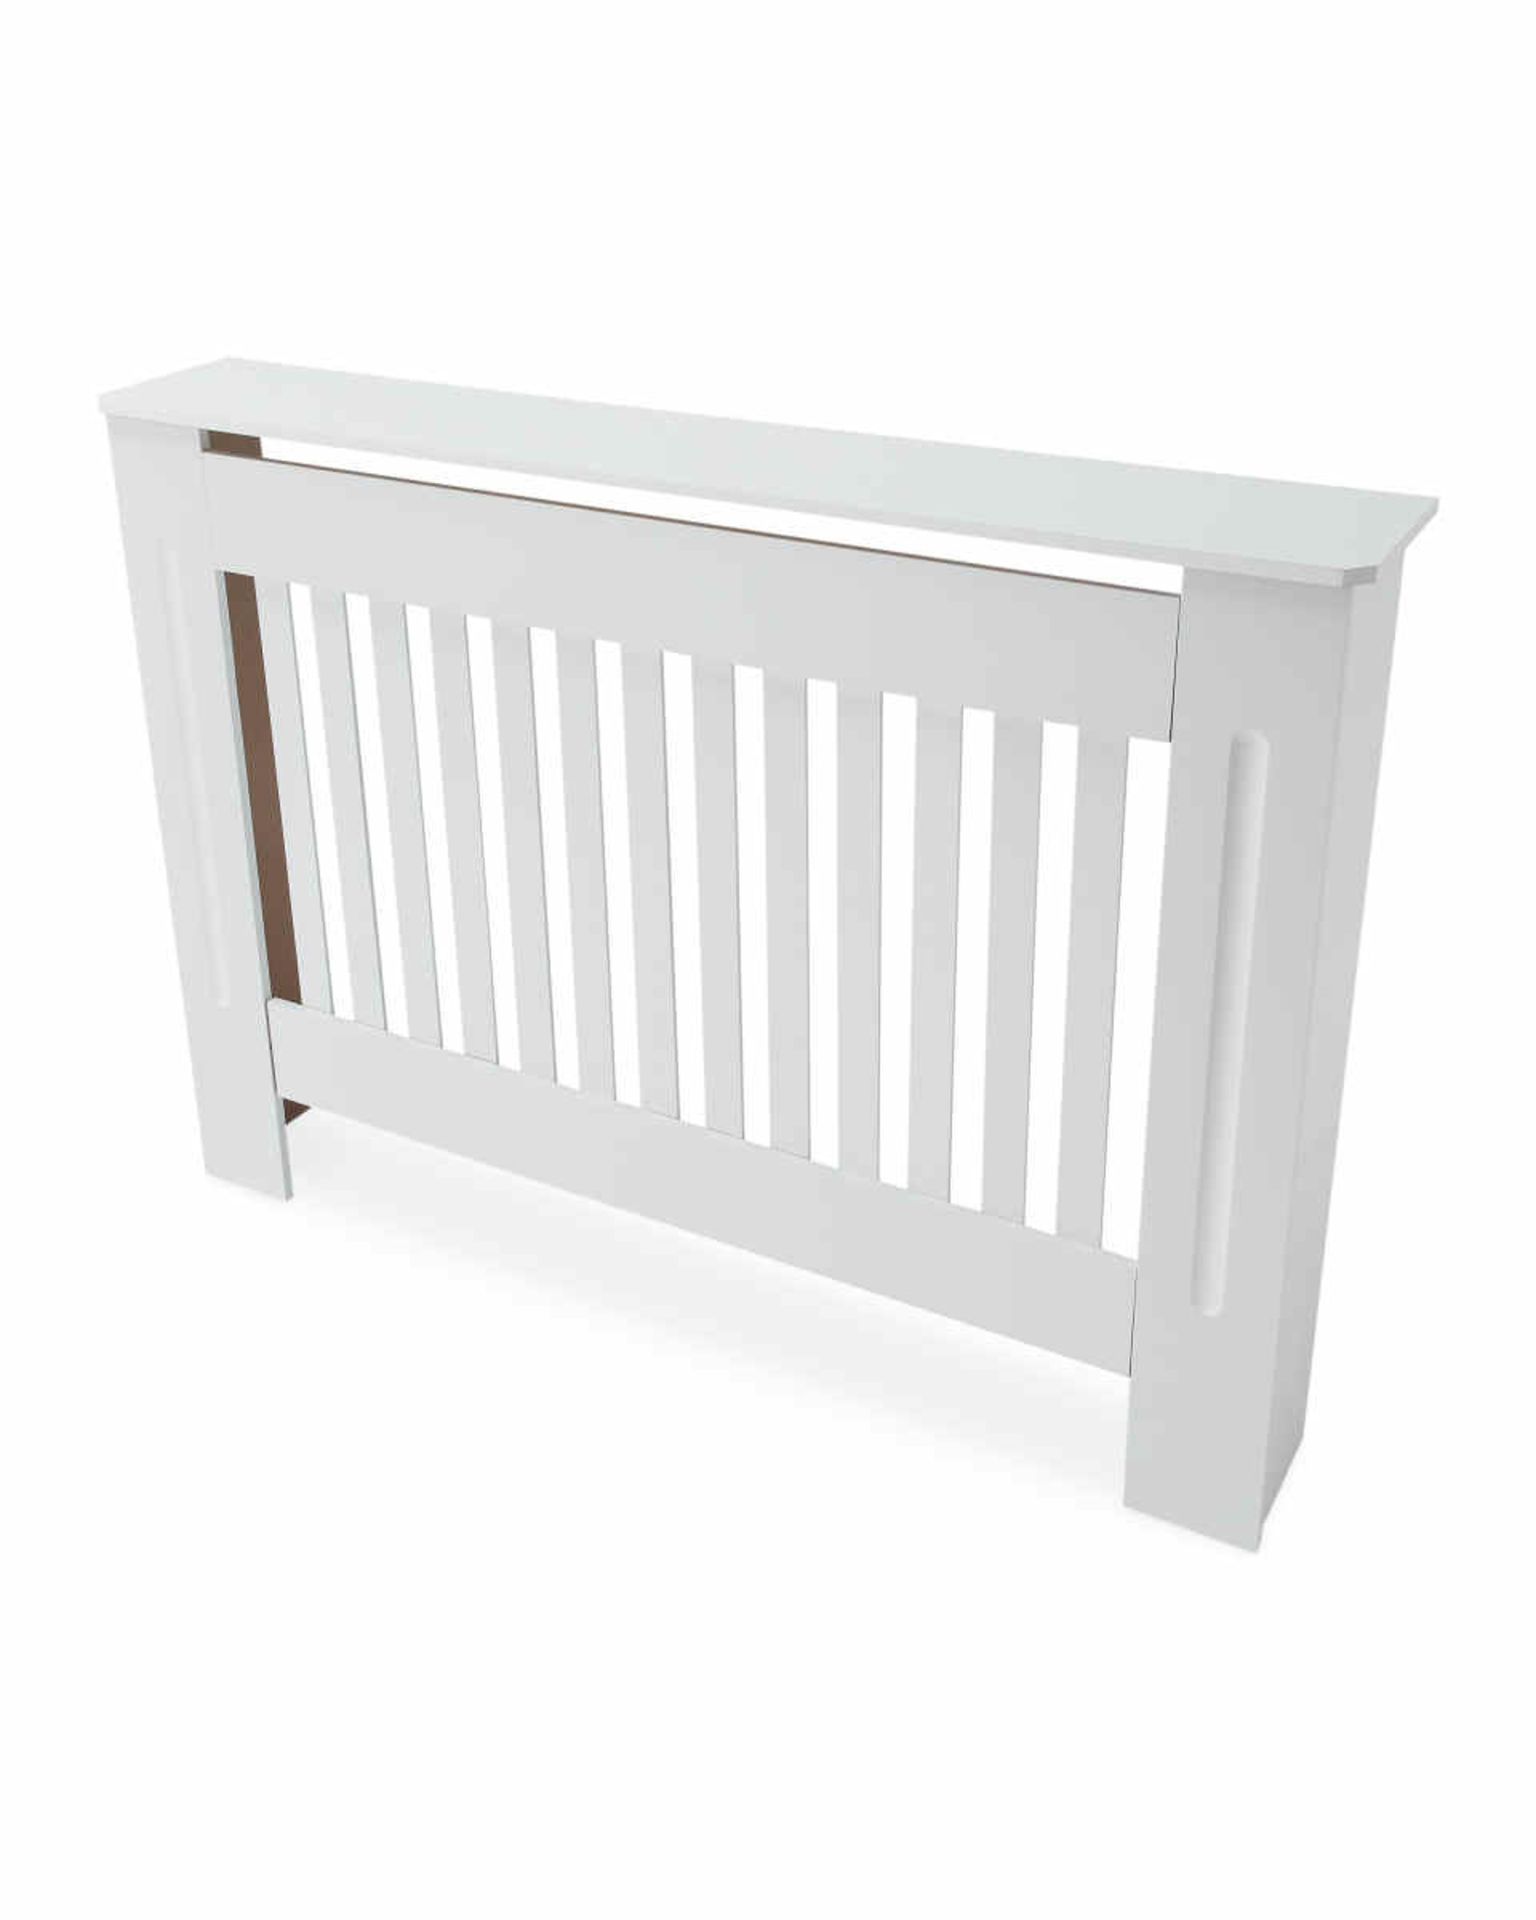 Luxury Radiator Cover. Complete your room with this Luxury Radiator Cover. This white painted MDF